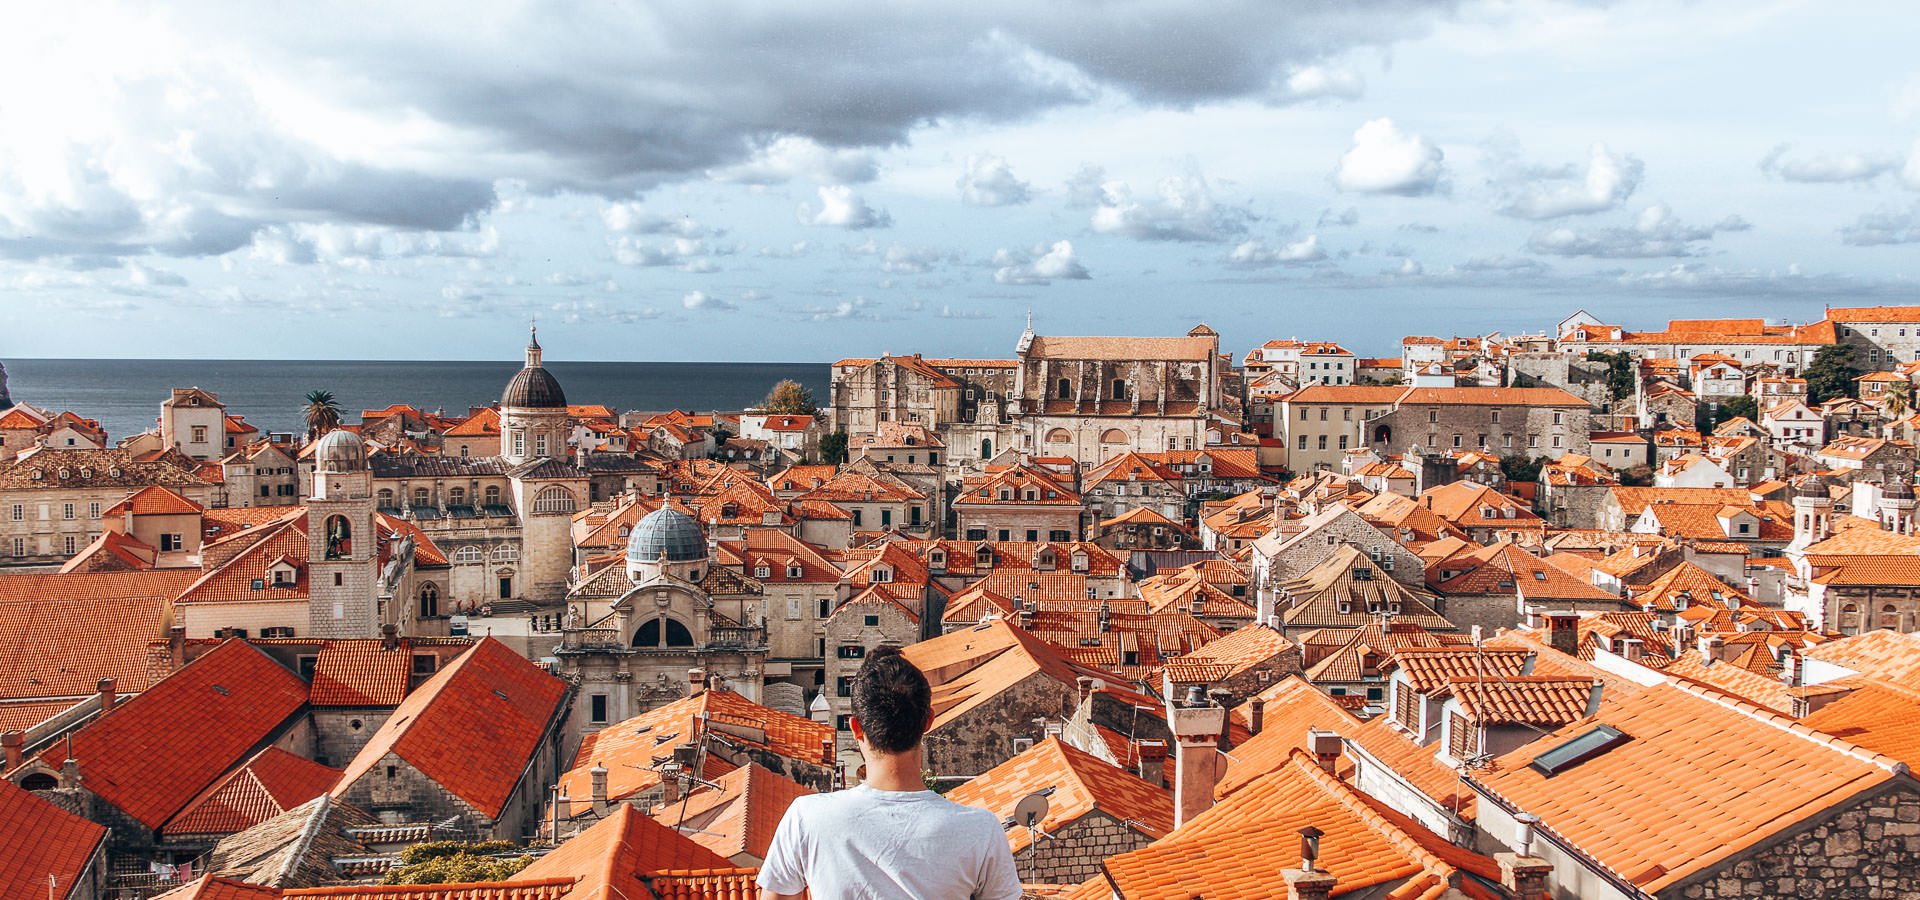 How To Spend 48 Hours In Dubrovnik | brunch in london 2